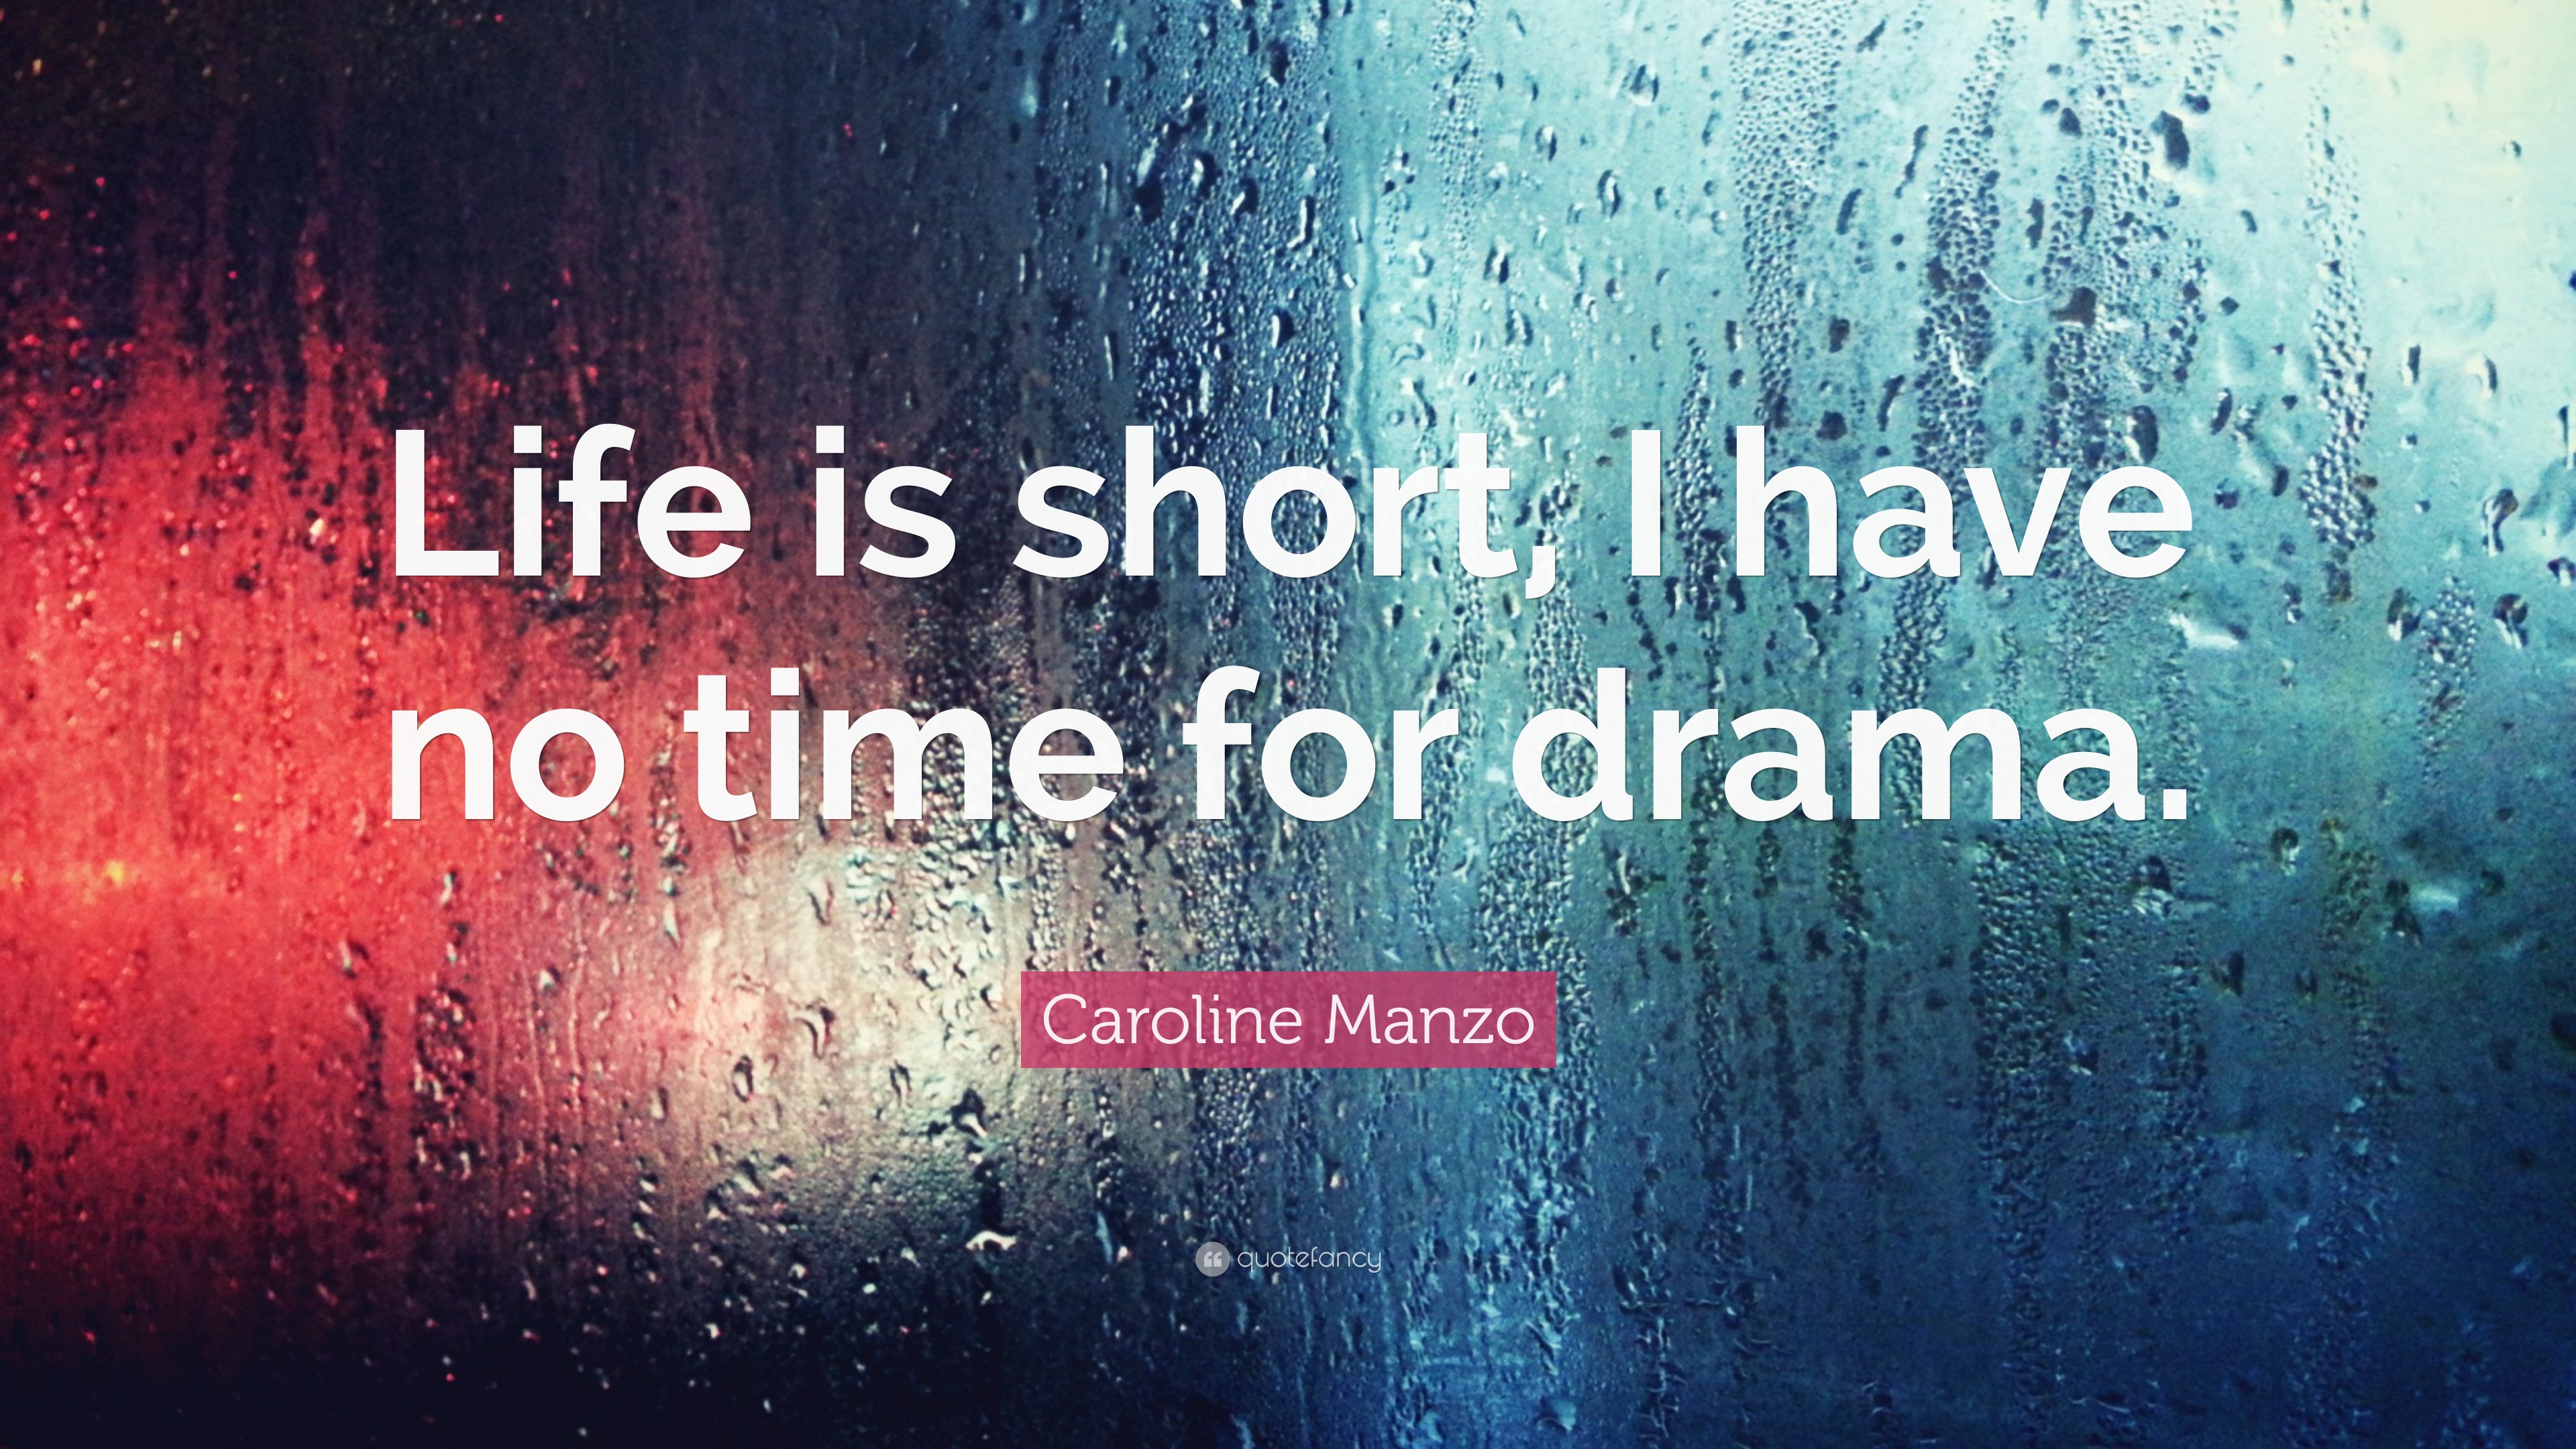 Caroline Manzo Quote: “Life is short, I have no time for drama.”